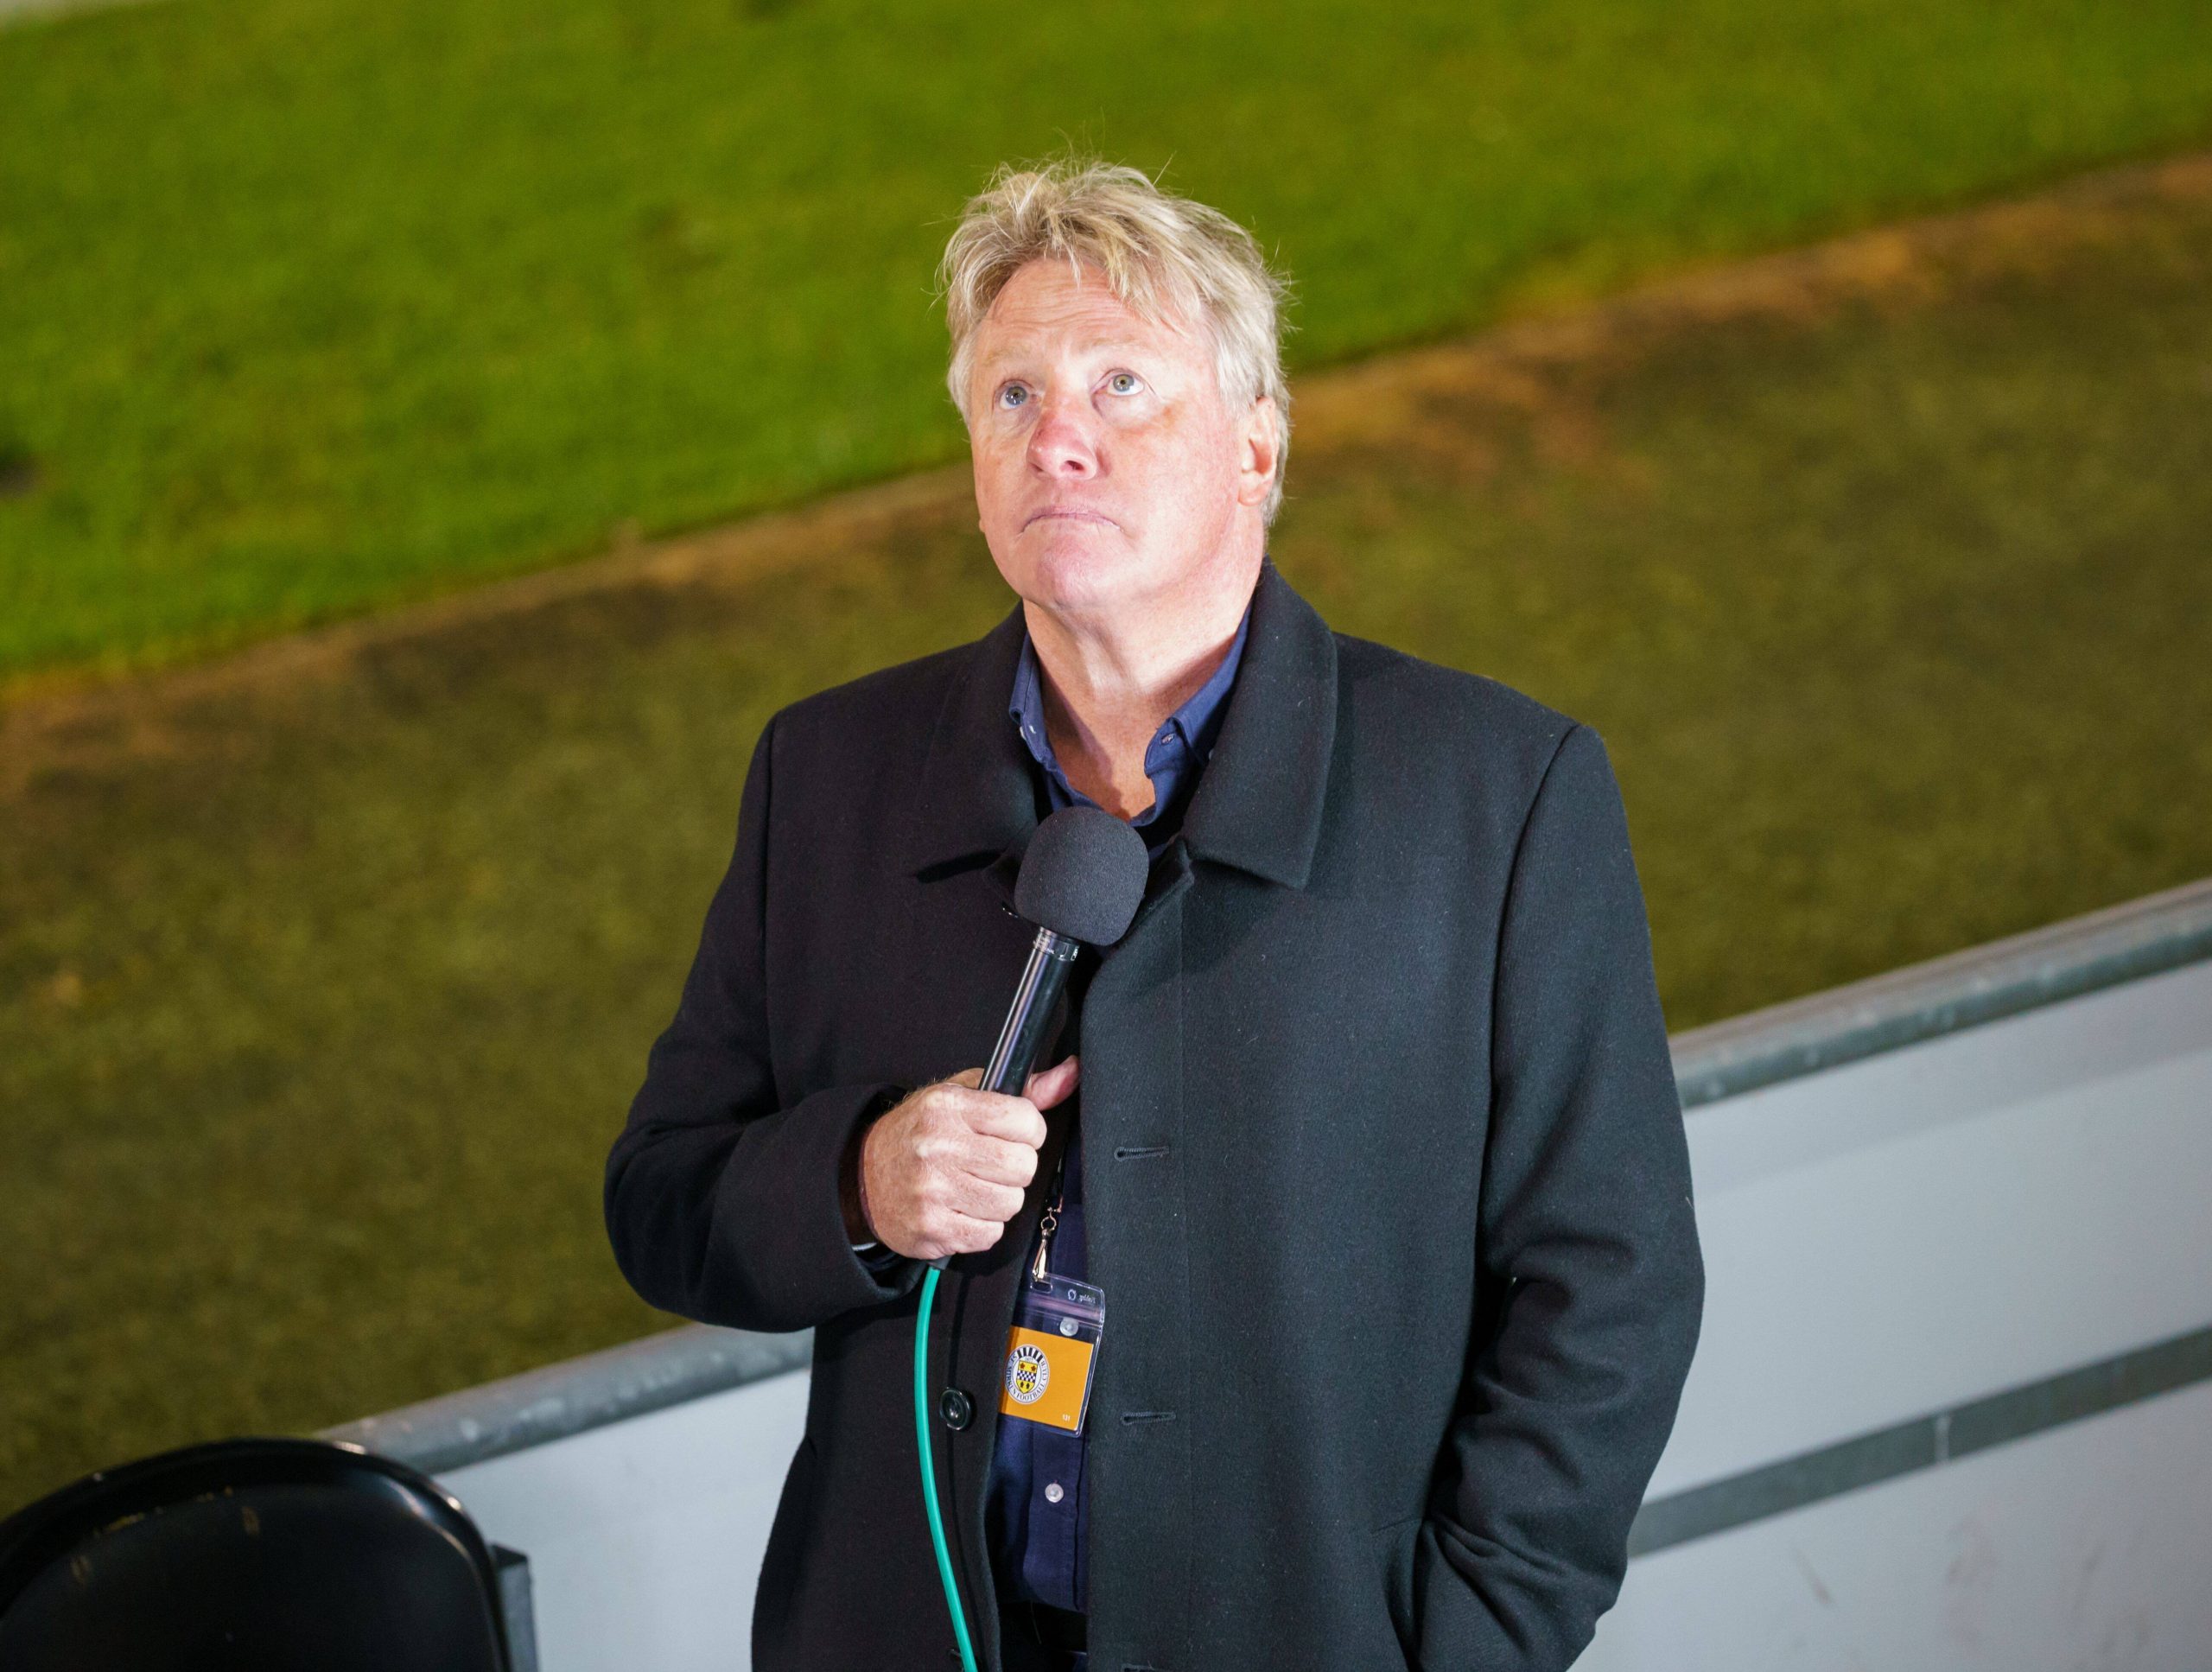 Frank McAvennie advises Chelsea to copy the Liverpool transfer approach.